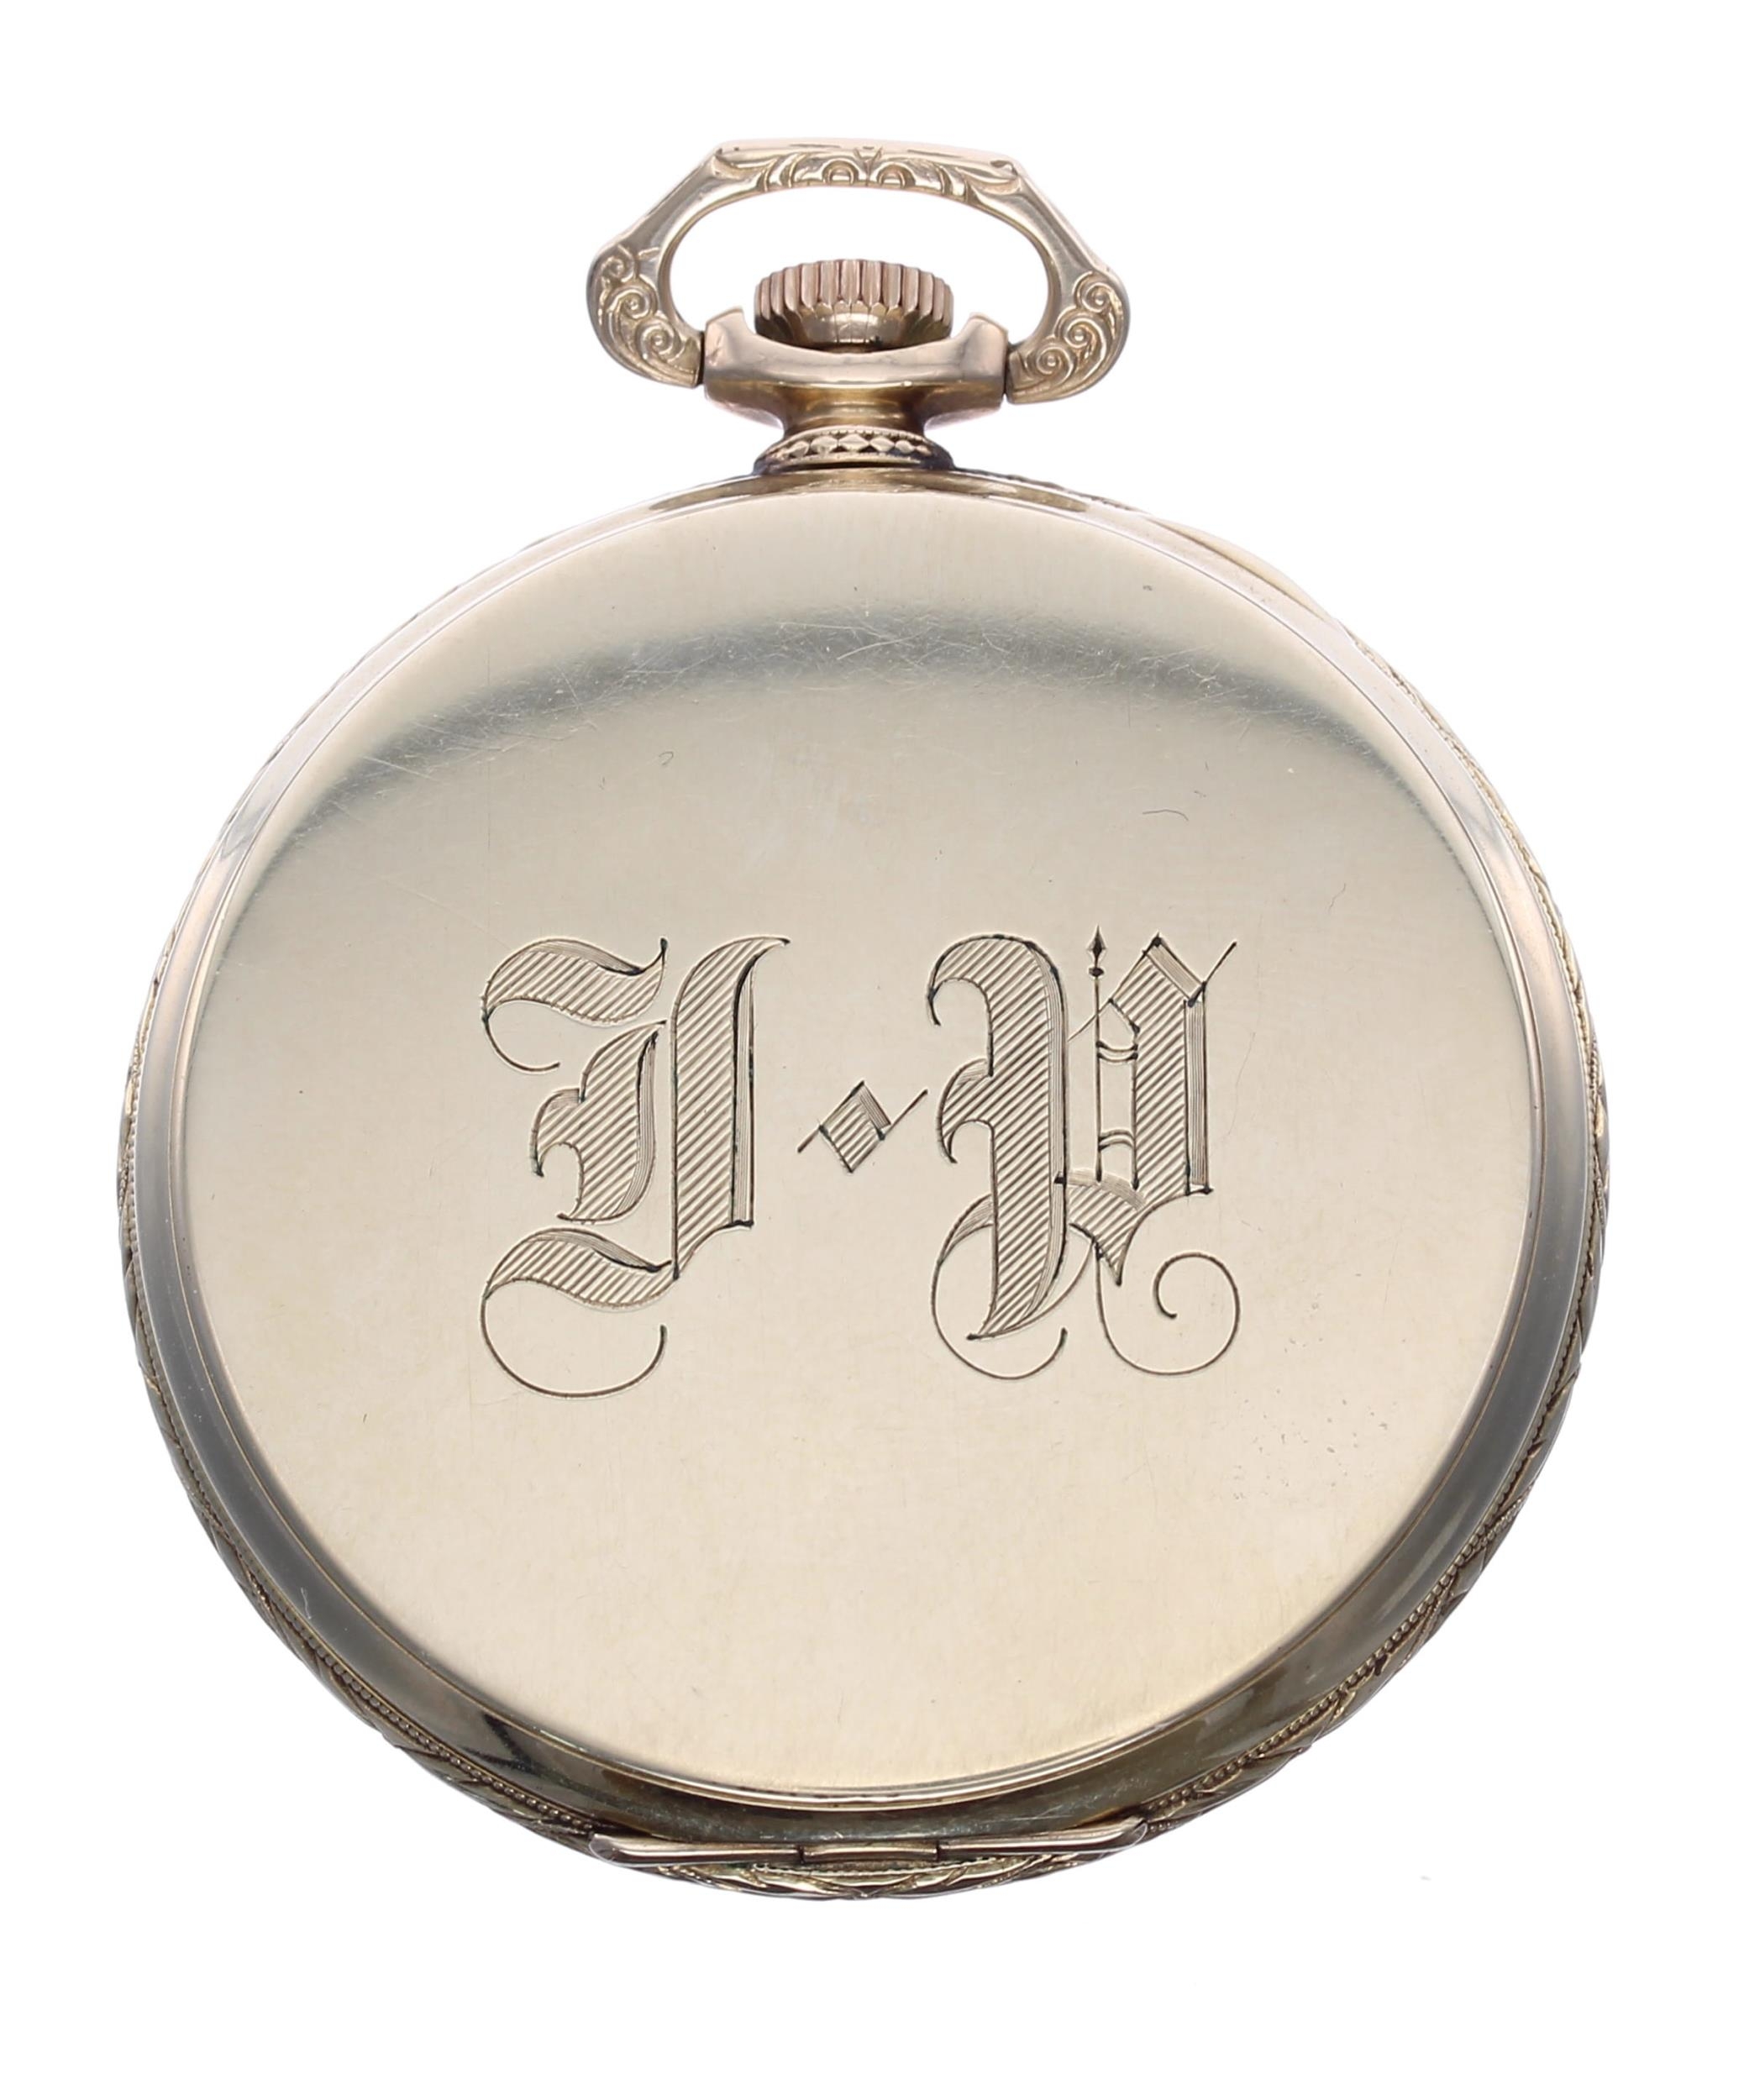 Illinois Watch Co. 'The Autocrat' 14k gold filled lever dress pocket watch, circa 1924, signed 17 - Image 4 of 4